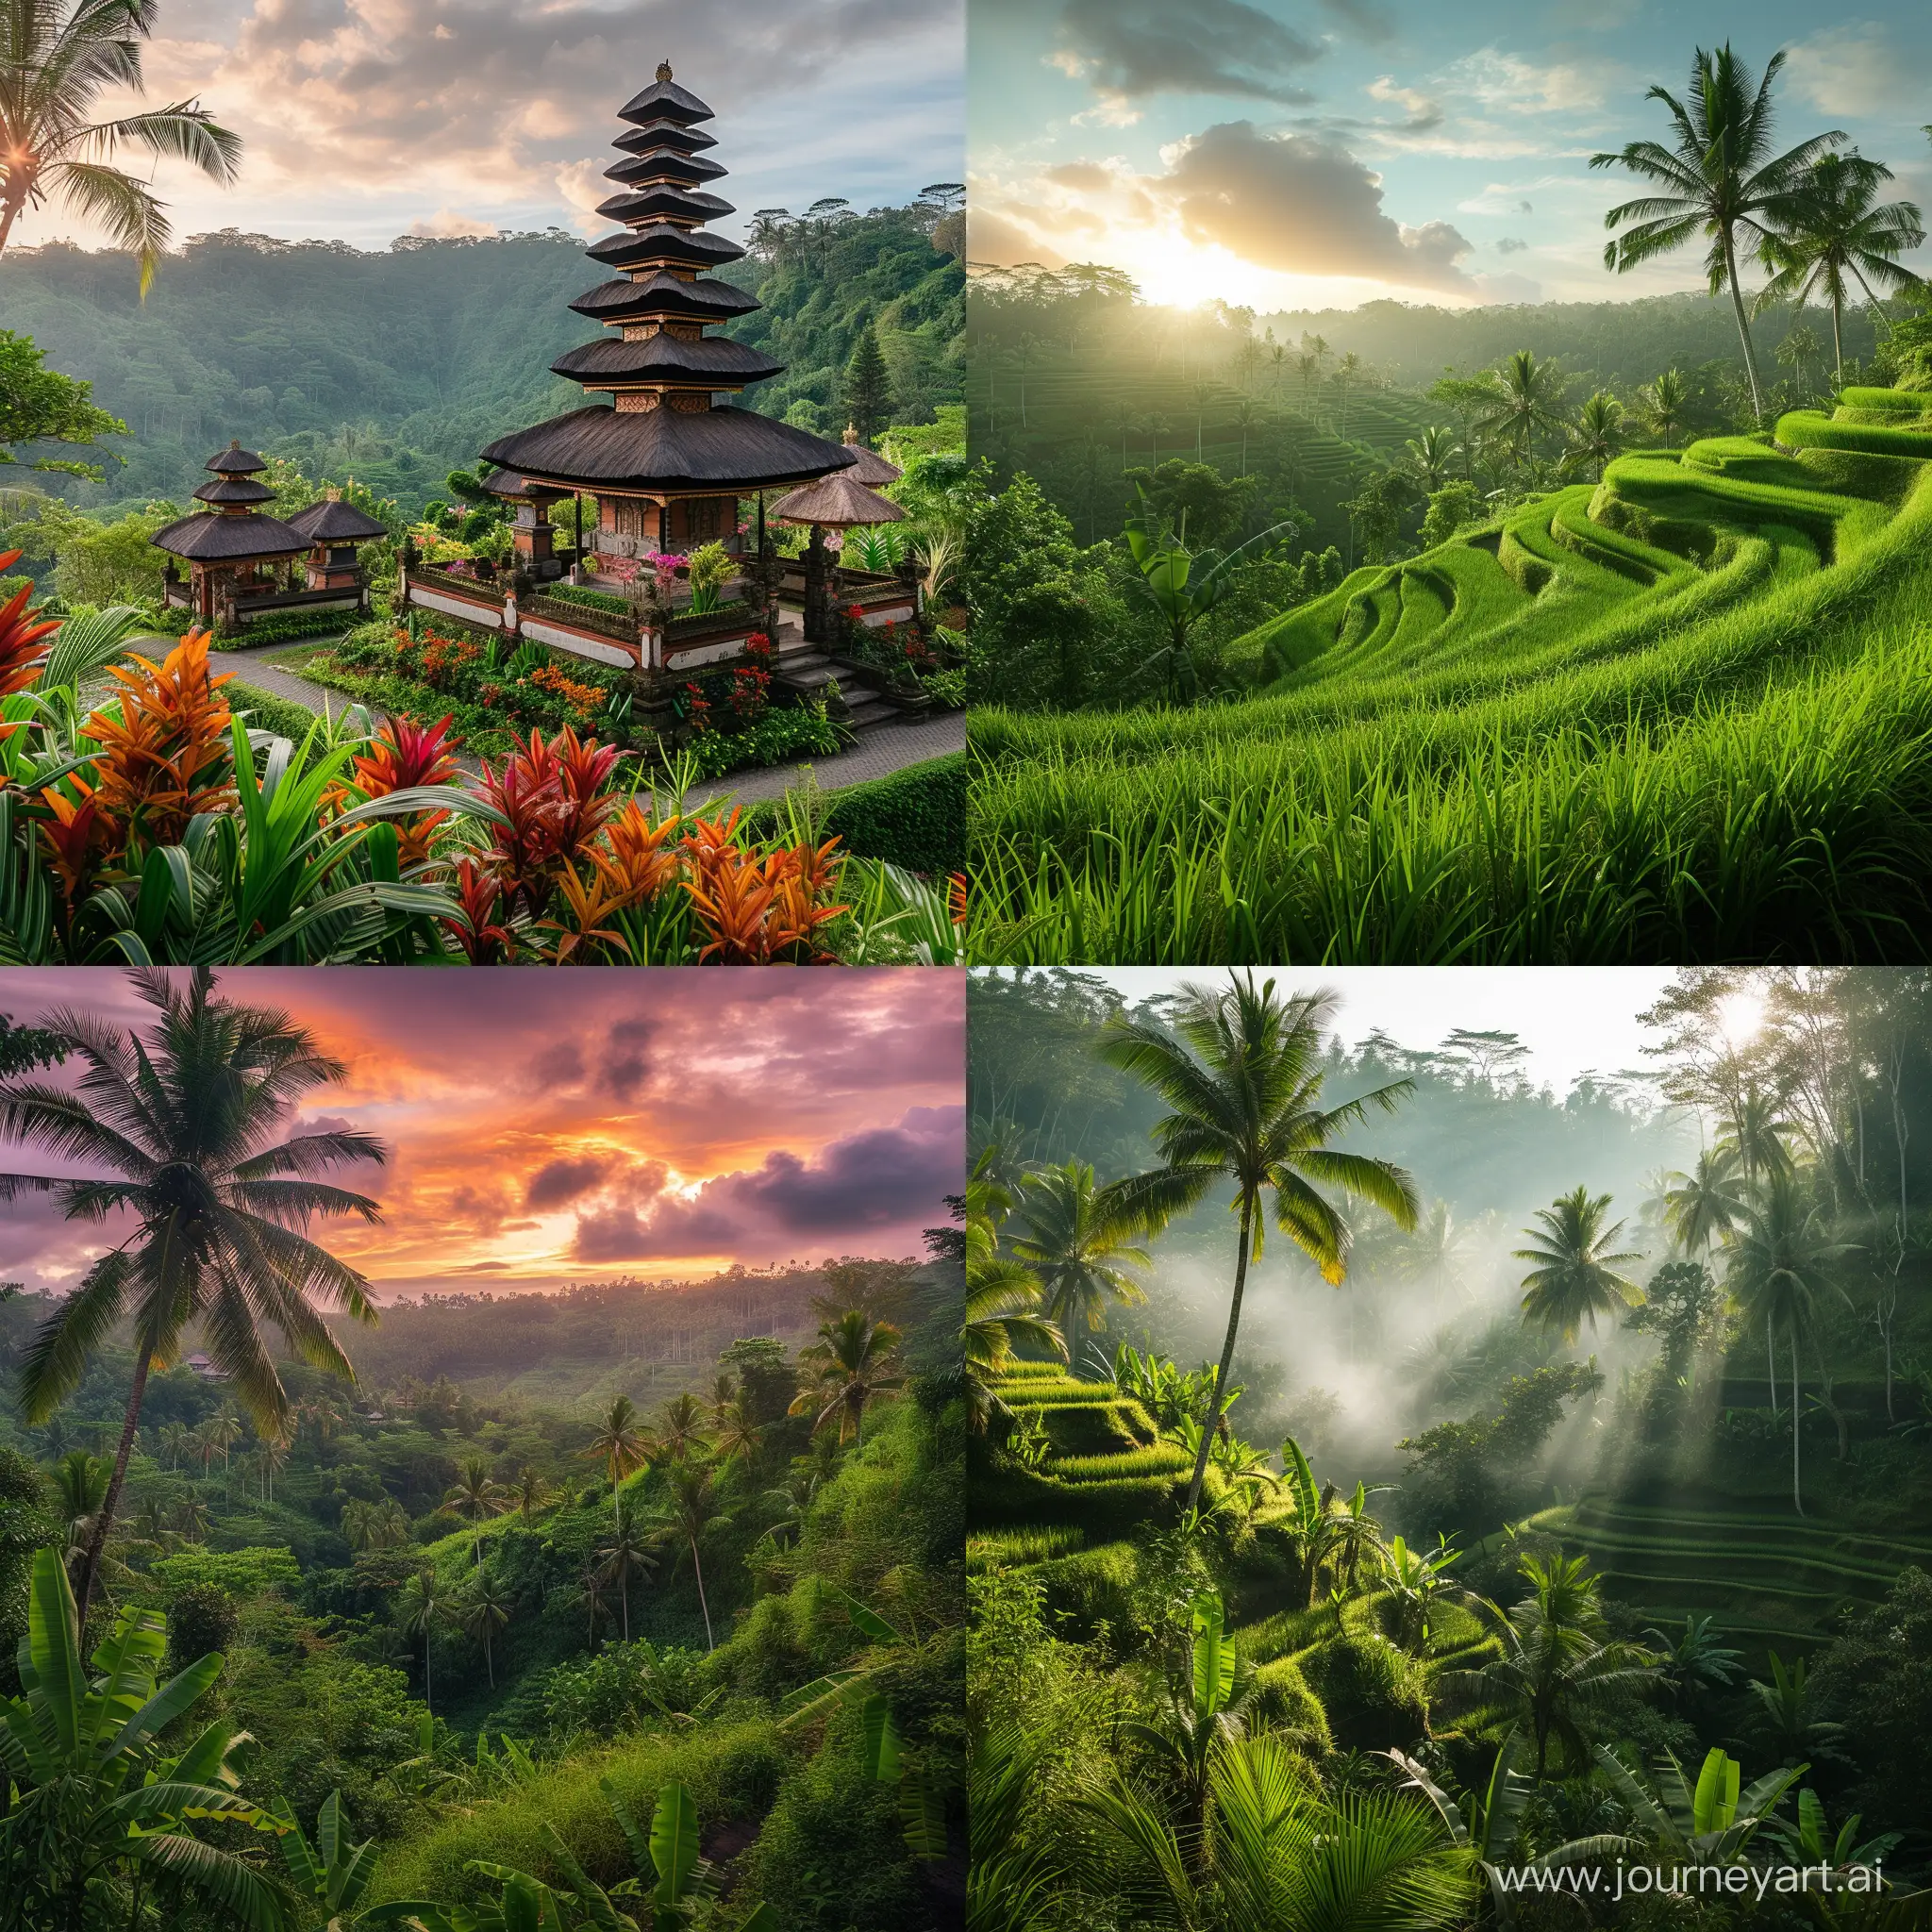 Breathtaking-8K-View-of-Bali-Islands-Exquisite-Natural-Beauty